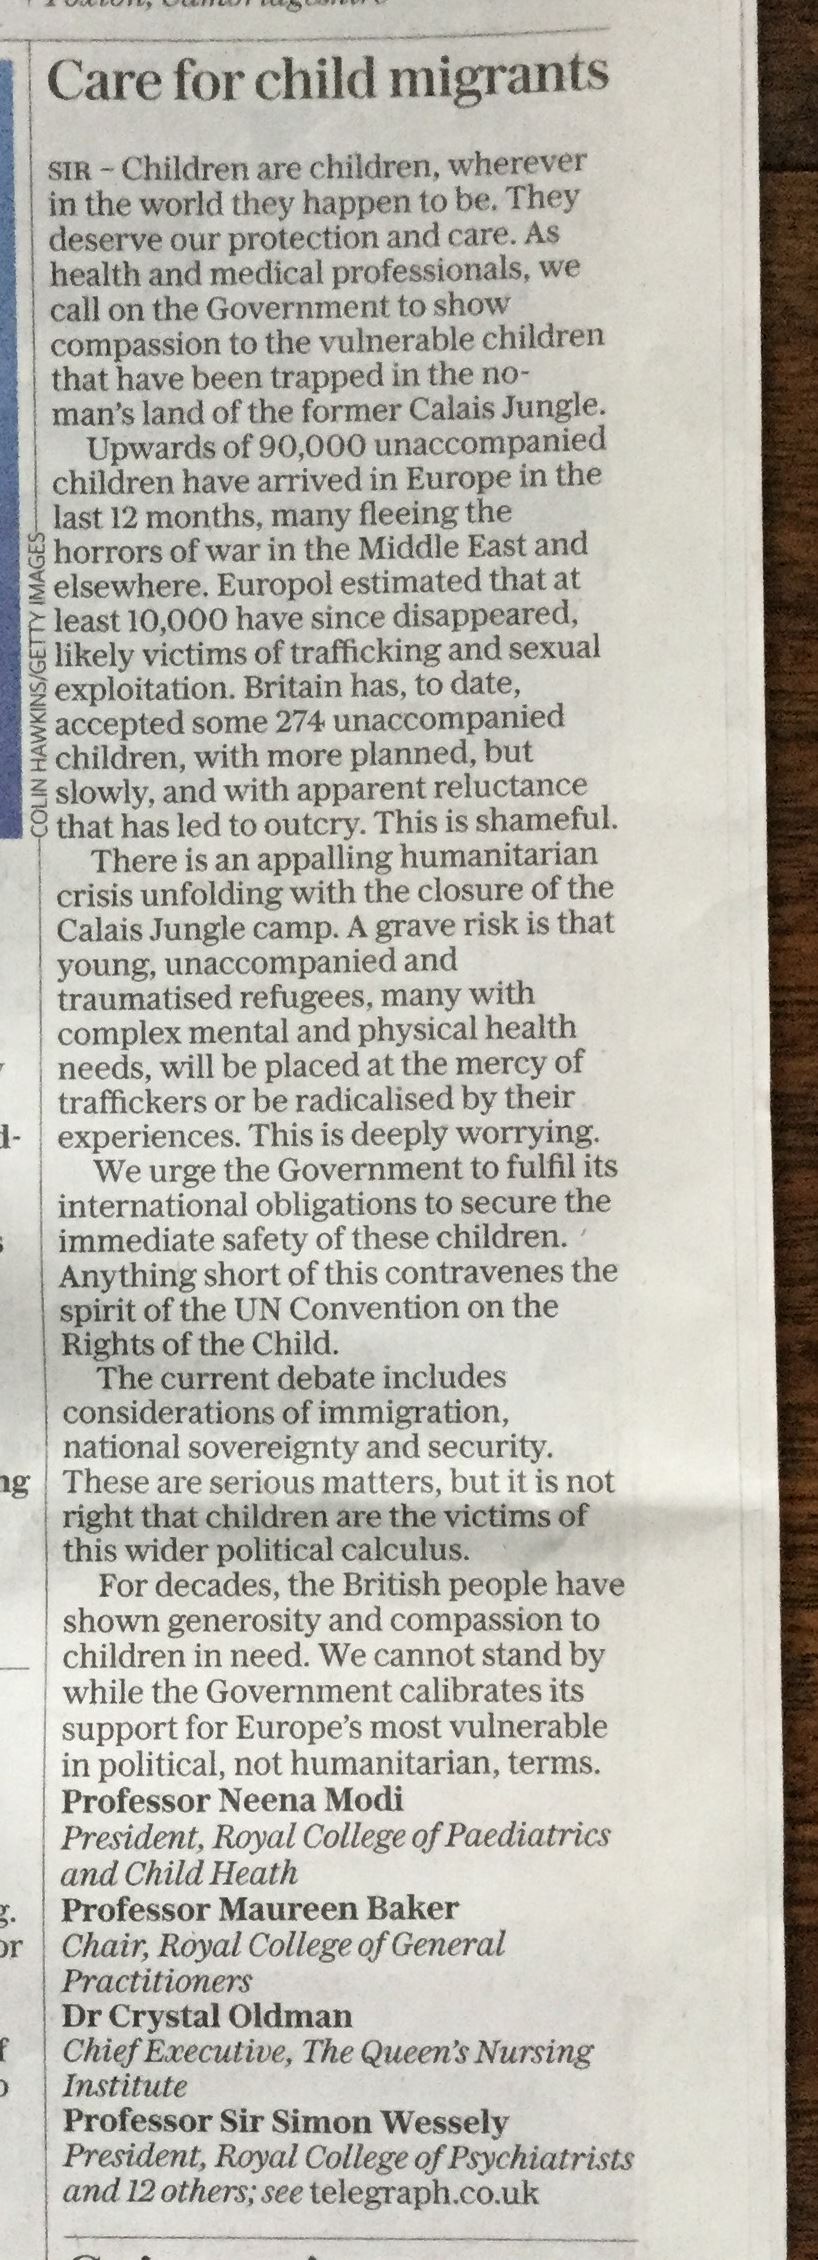 Letter published in the Daily Telegraph 4/11/16